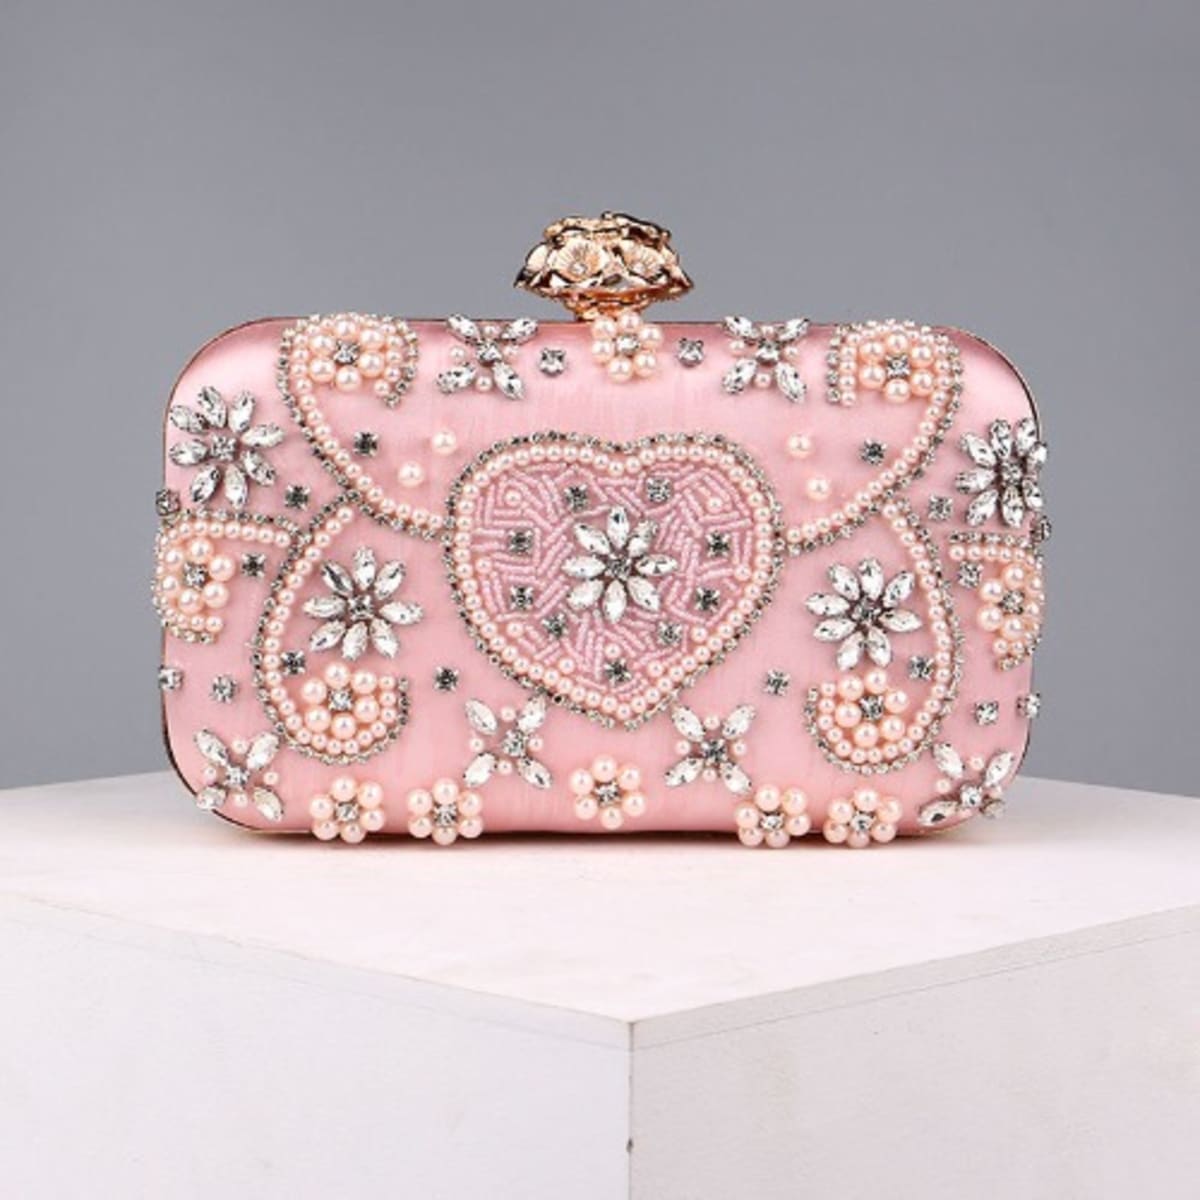 7 Exquisitely Trendy Evening Clutch Bags To Complete A Chic Summer Wardrobe